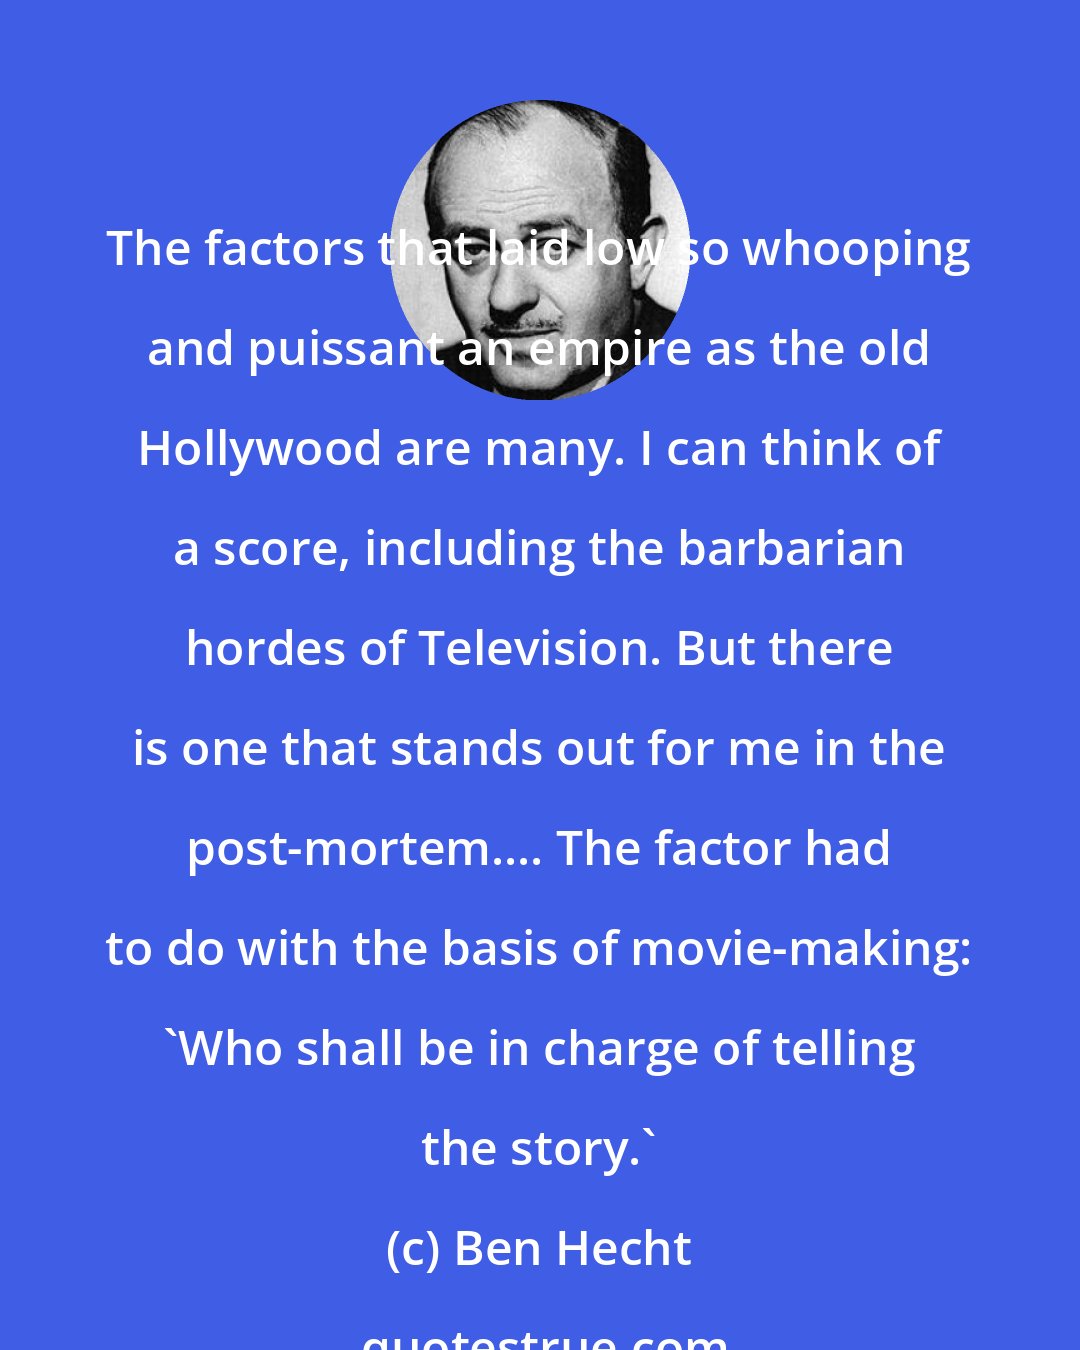 Ben Hecht: The factors that laid low so whooping and puissant an empire as the old Hollywood are many. I can think of a score, including the barbarian hordes of Television. But there is one that stands out for me in the post-mortem.... The factor had to do with the basis of movie-making: 'Who shall be in charge of telling the story.'